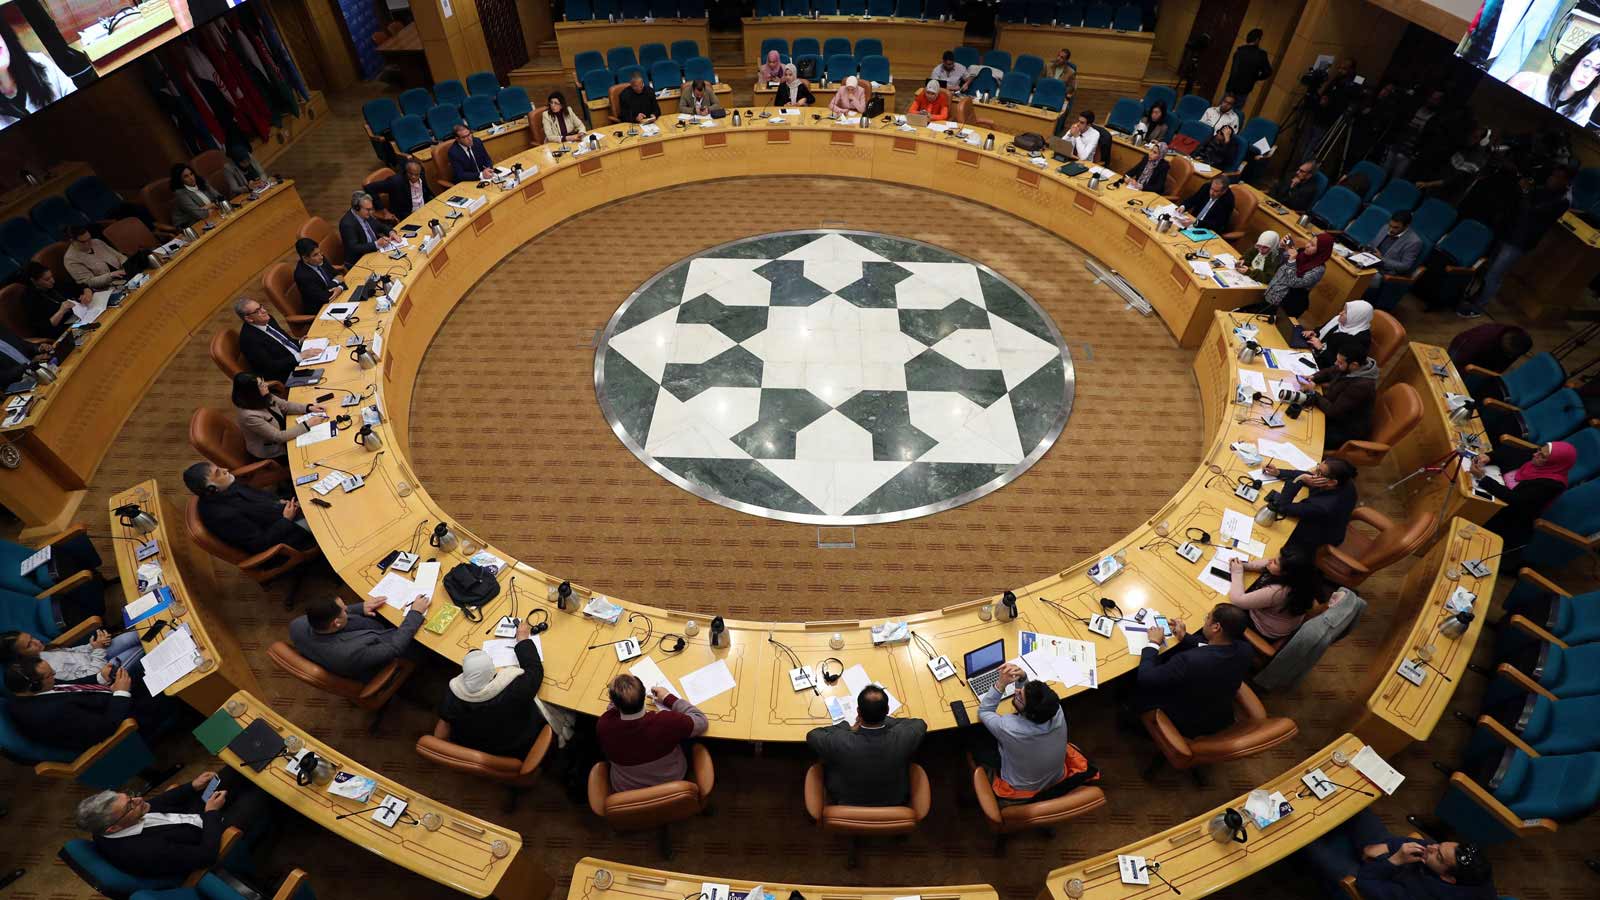 A view of a circular conference table at the United Nations with speakers seated in front of microphones. At the center is a mosaic of green and white marble.